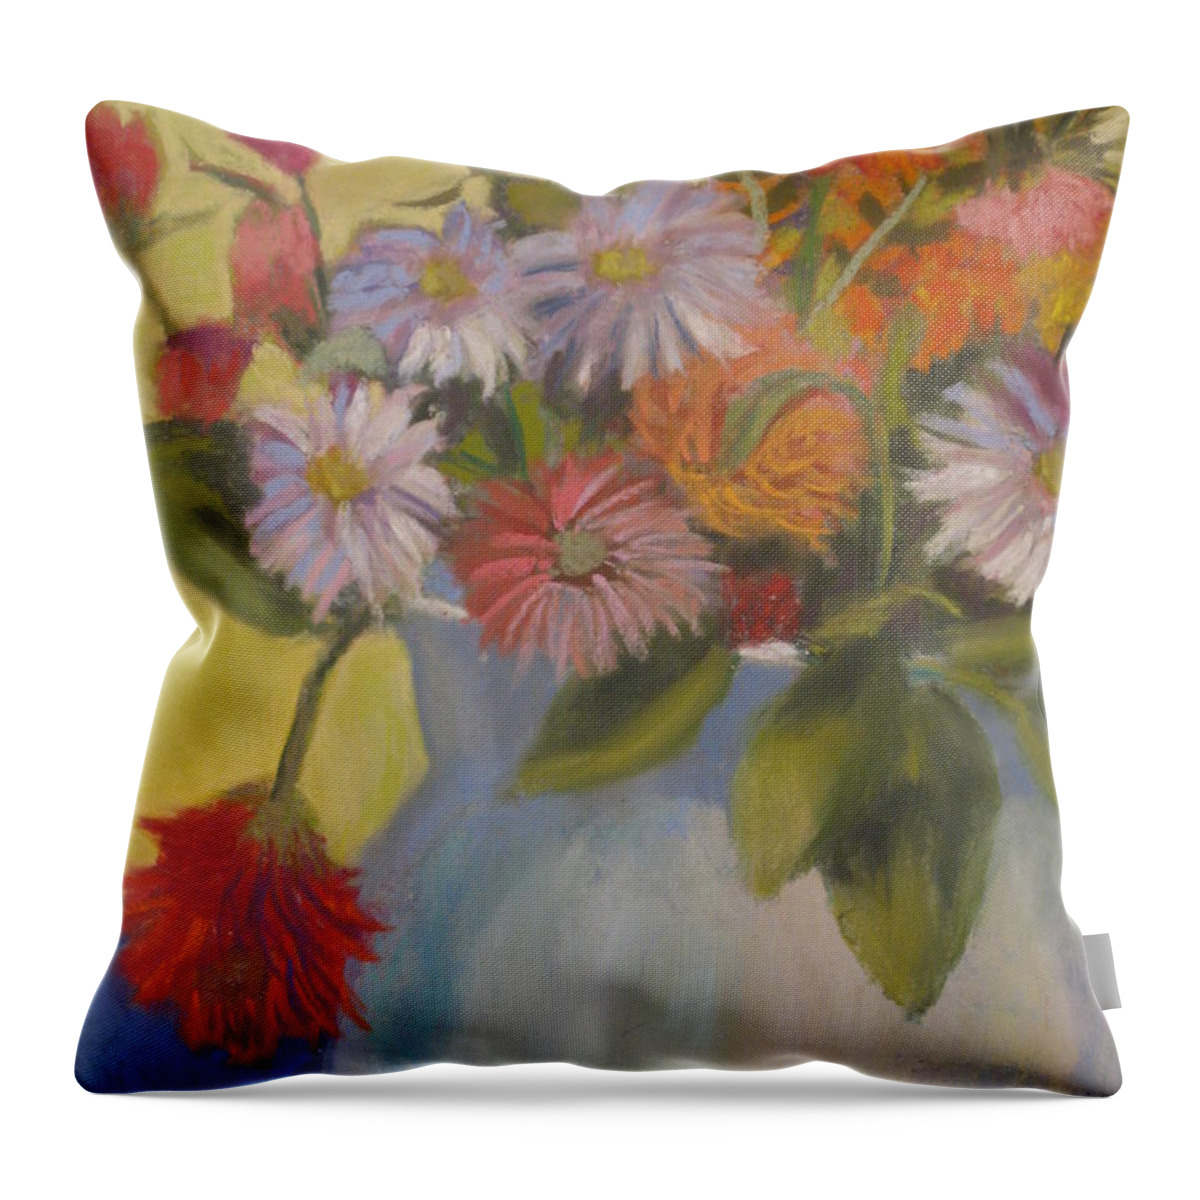 A Bouquet Of Flowers Throw Pillow featuring the painting Martha's Flowers by Constance Gehring